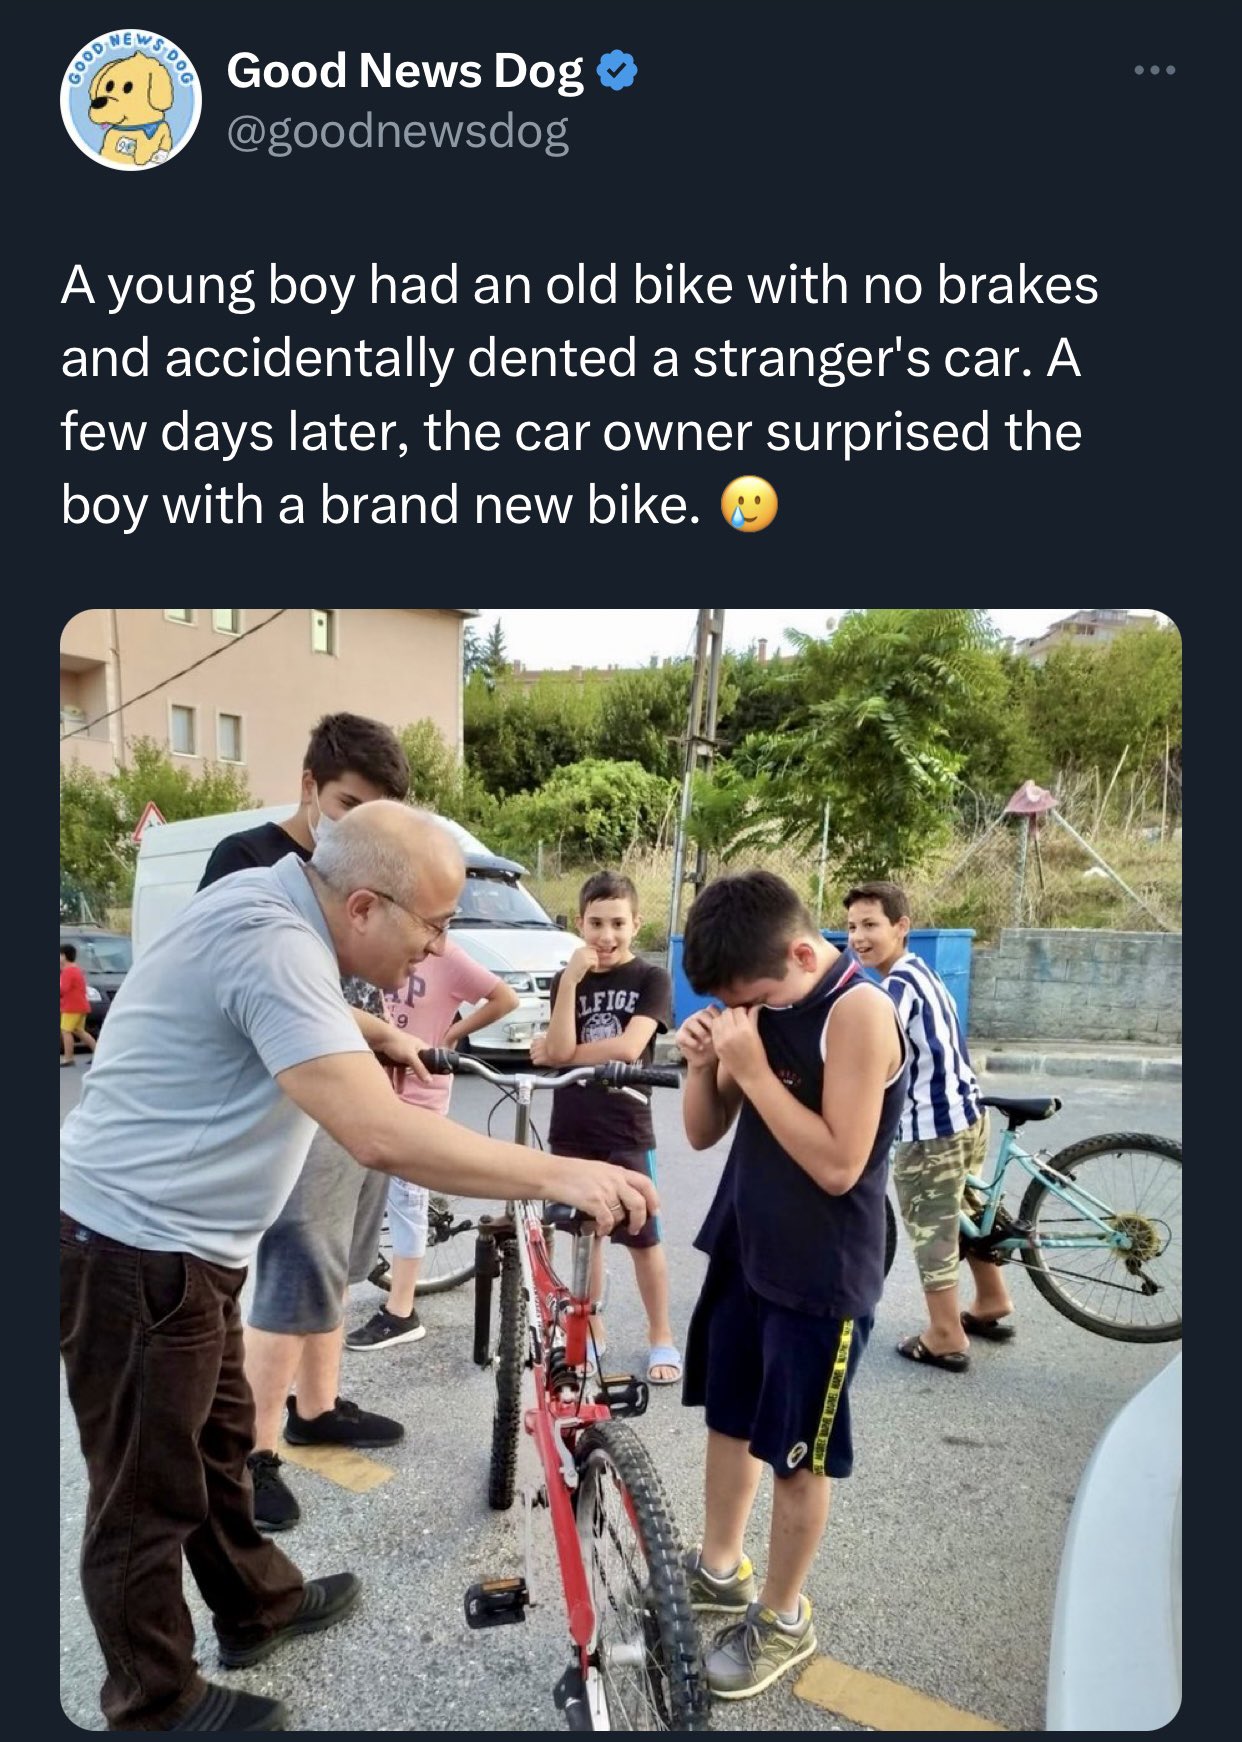 dudes posting their Ws - community - Goo9 S Dog Good News Dog A young boy had an old bike with no brakes and accidentally dented a stranger's car. A few days later, the car owner surprised the boy with a brand new bike. C Lfige Gama